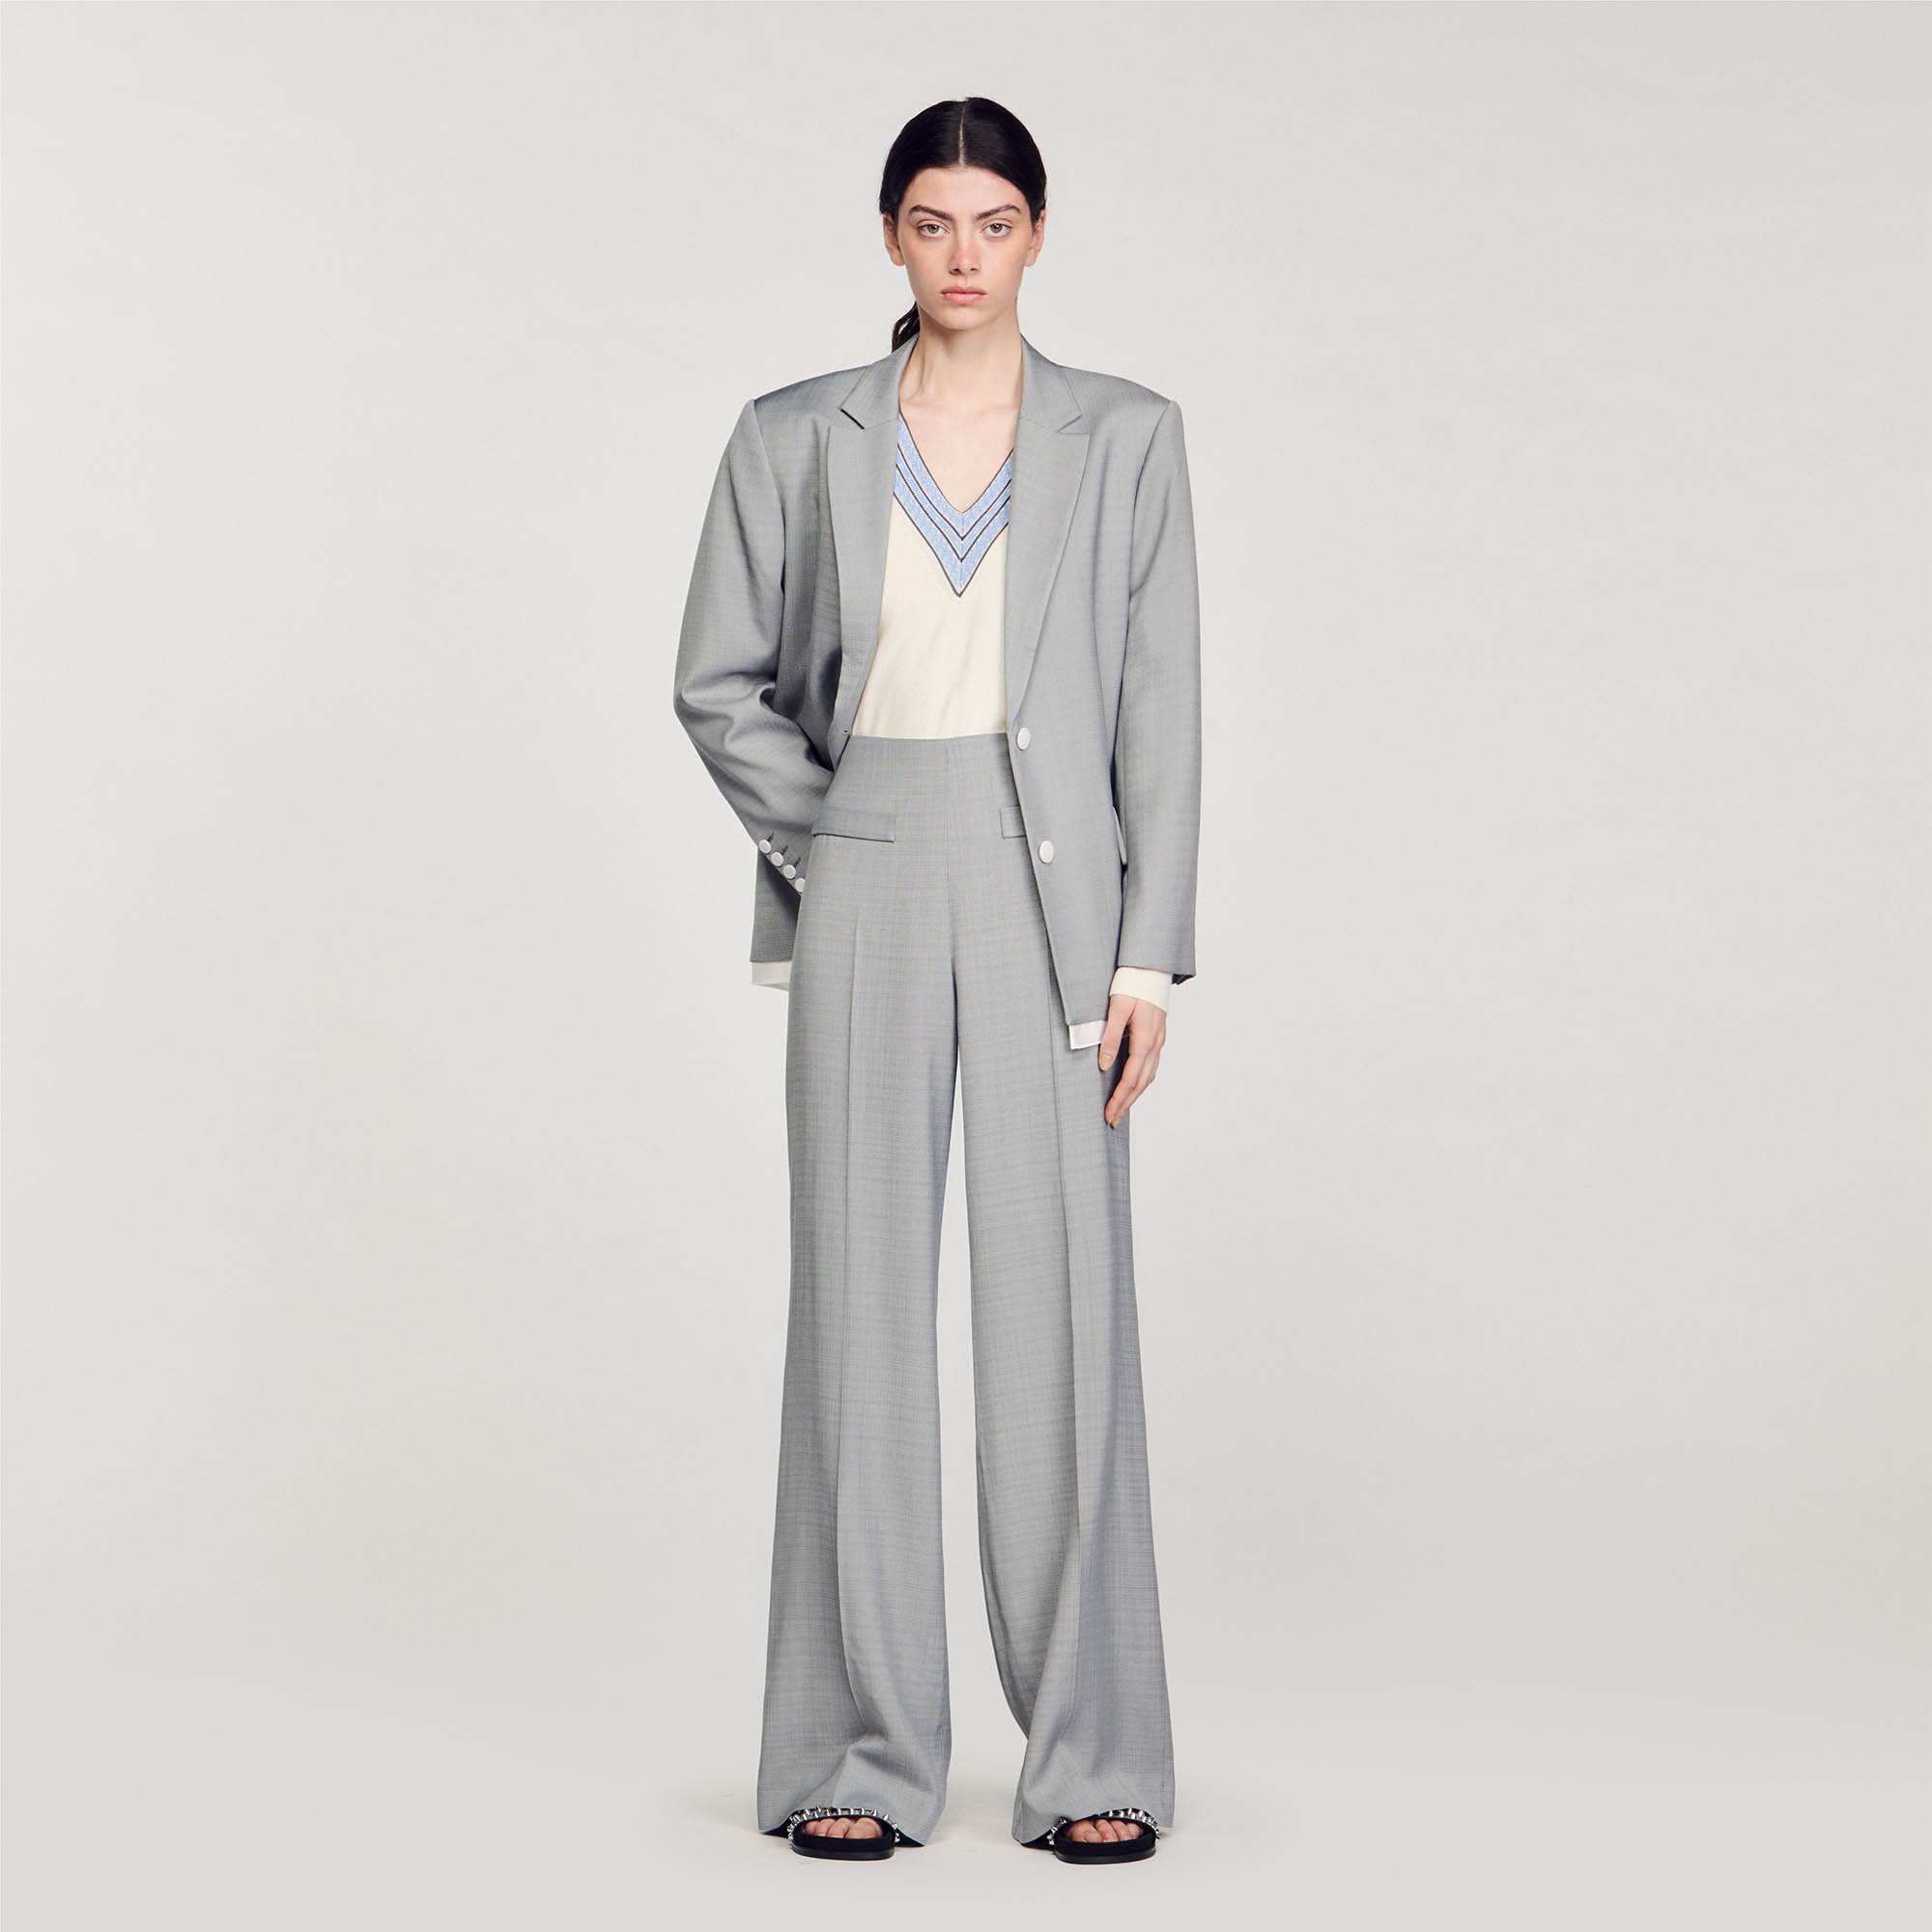 Sandro viscose Belt lining: High-waisted trousers with flared legs and ironed creases, featuring large welt pockets